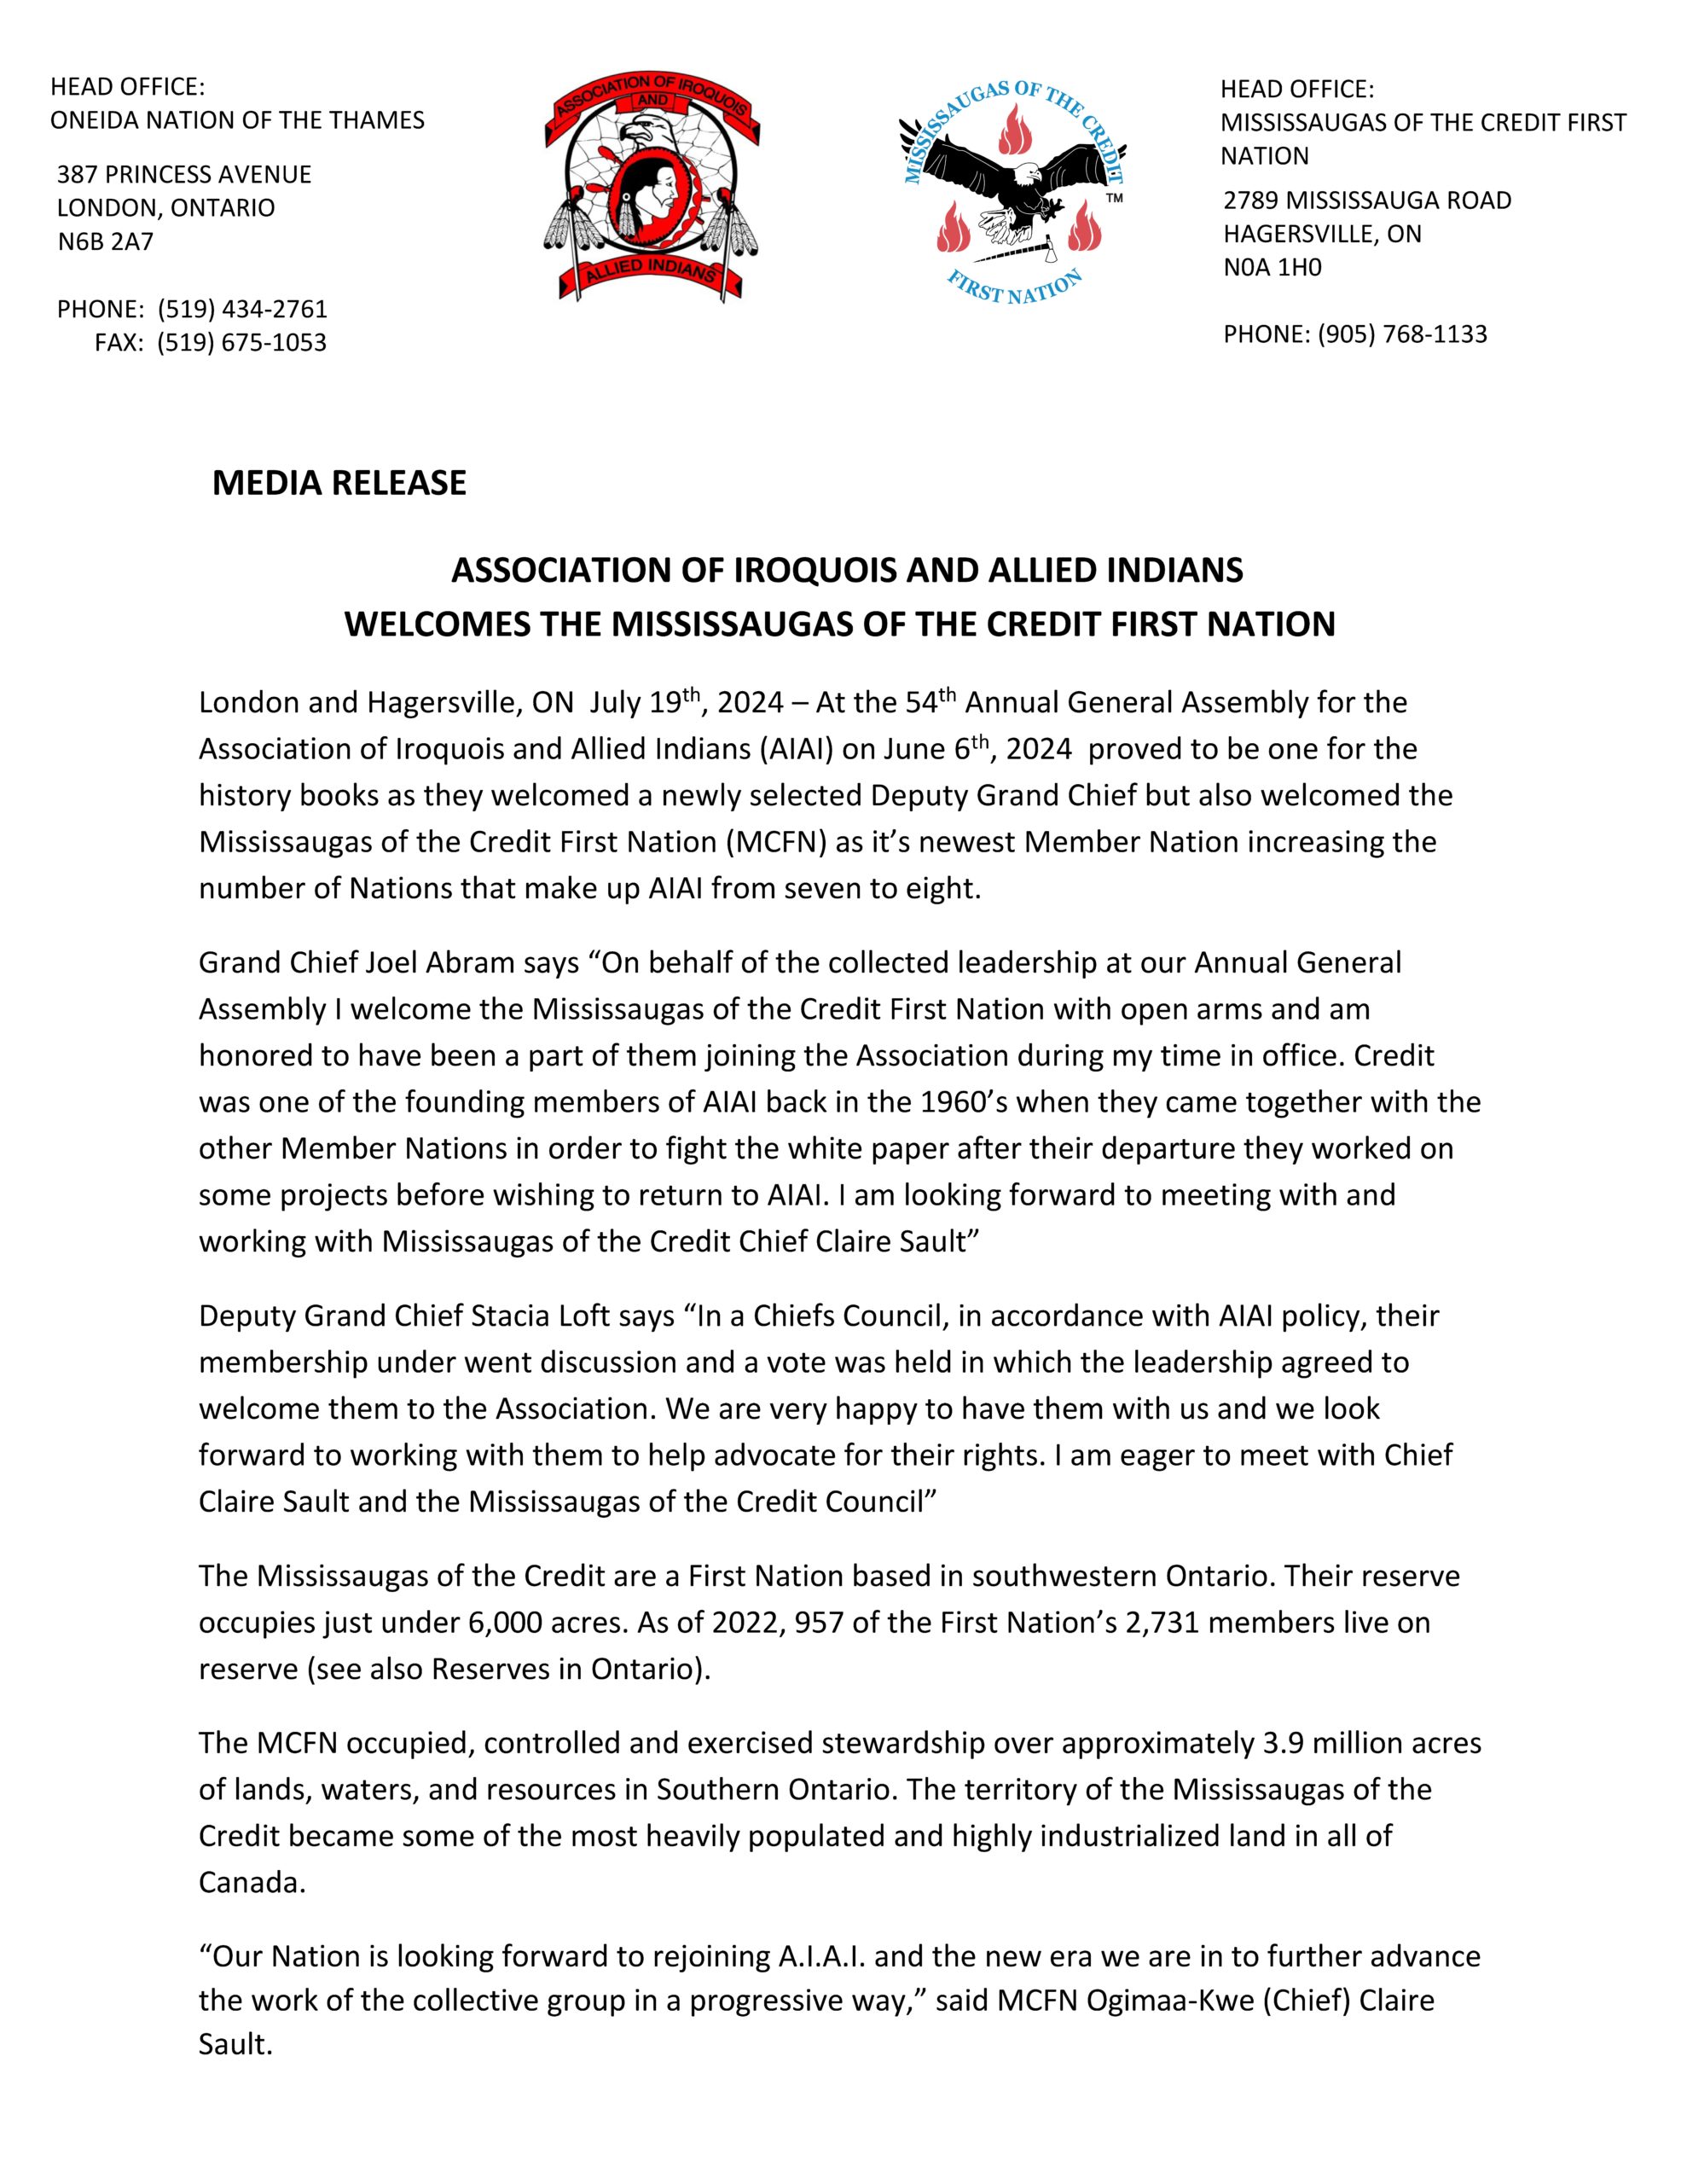 ASSOCIATION OF IROQUOIS AND ALLIED INDIANS WELCOMES THE MISSISSAUGAS OF THE CREDIT FIRST NATION